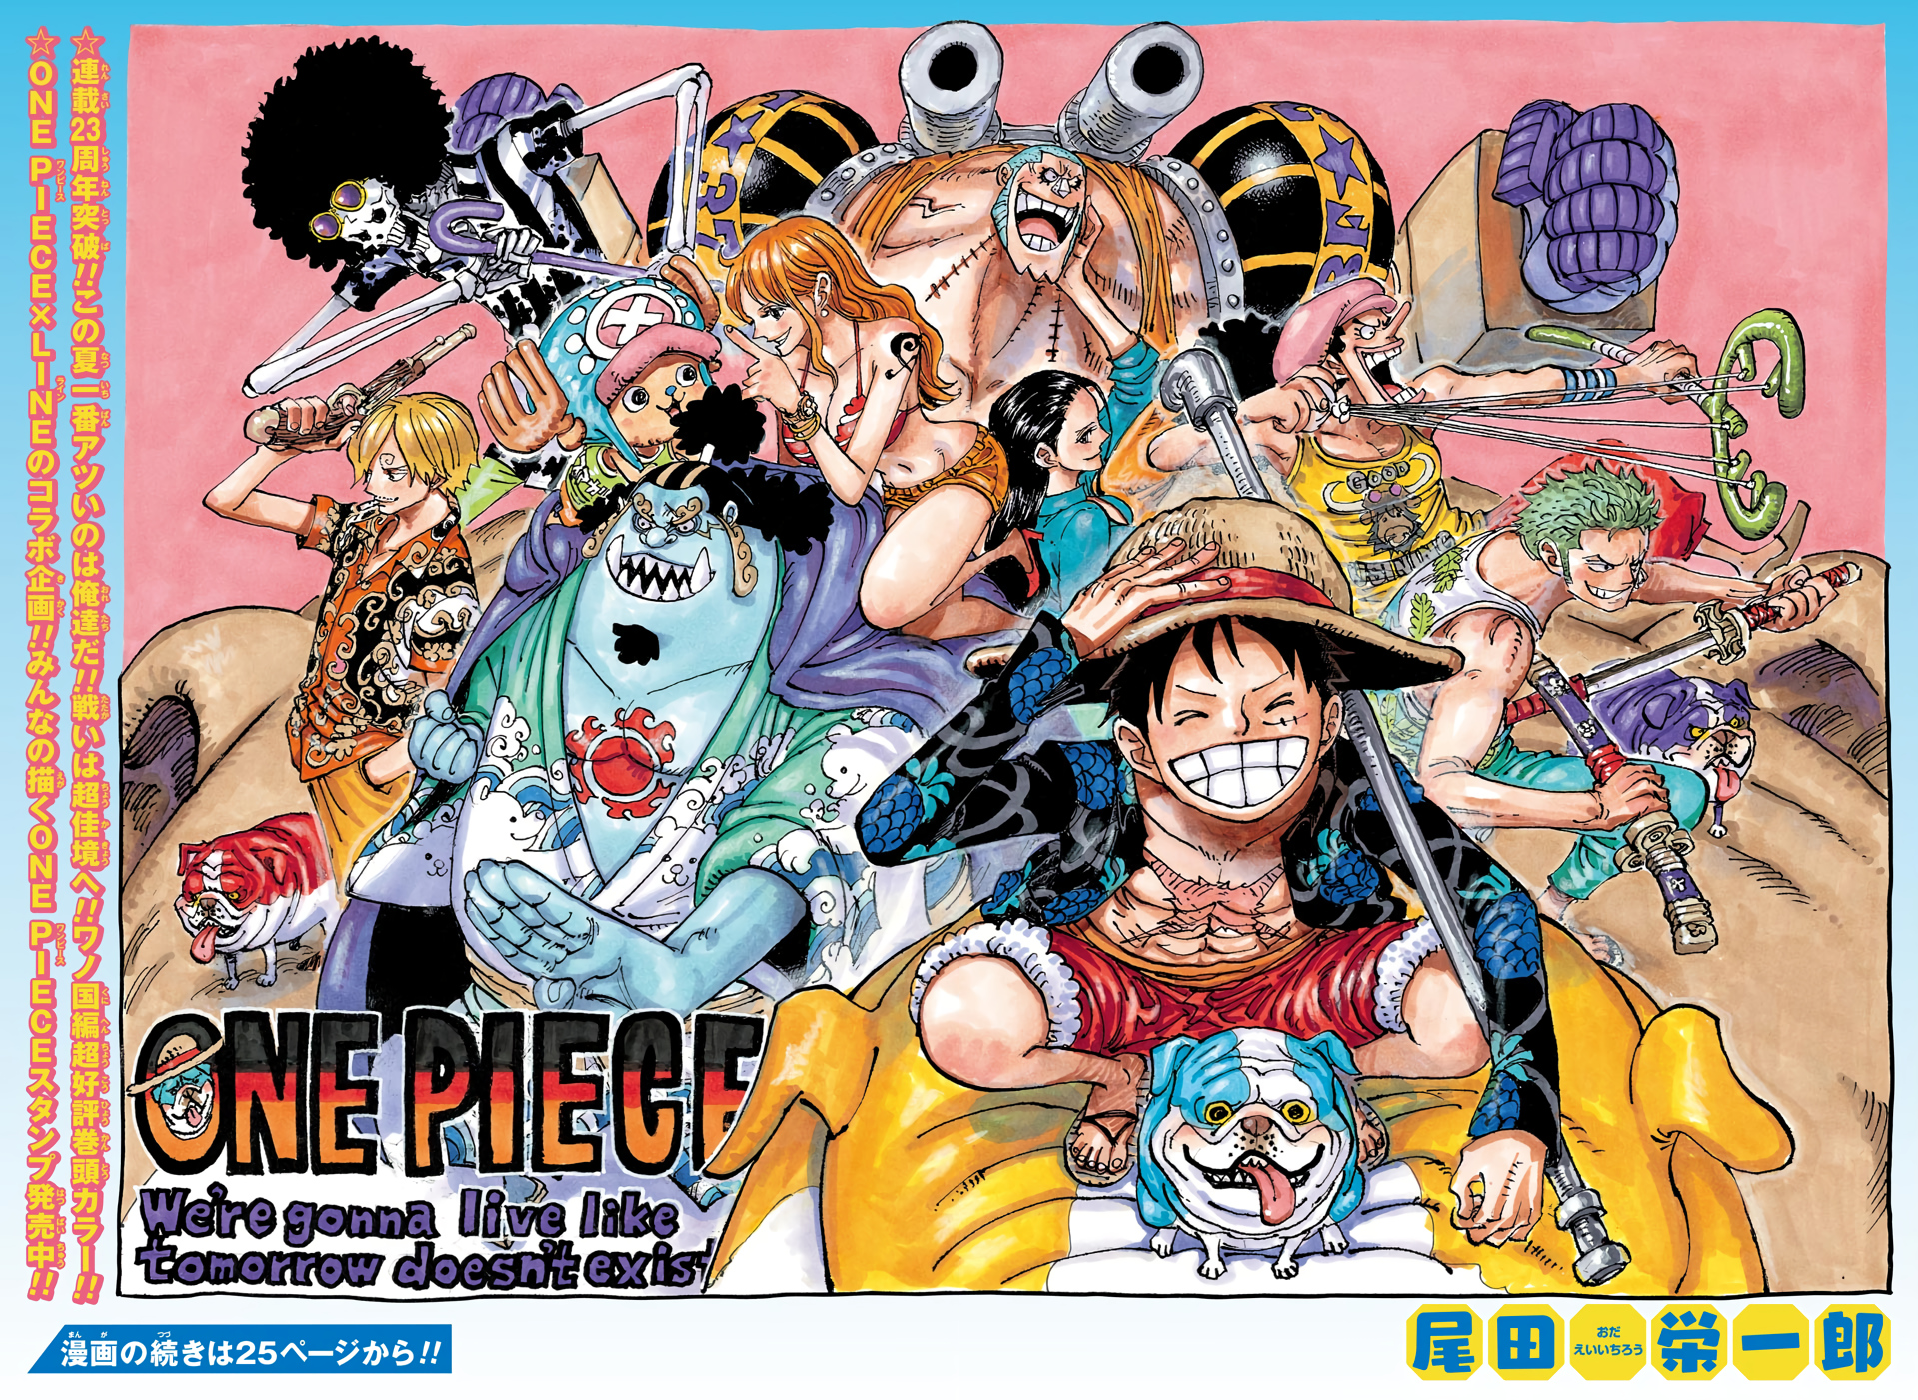 Chapter 987, One Piece Wiki